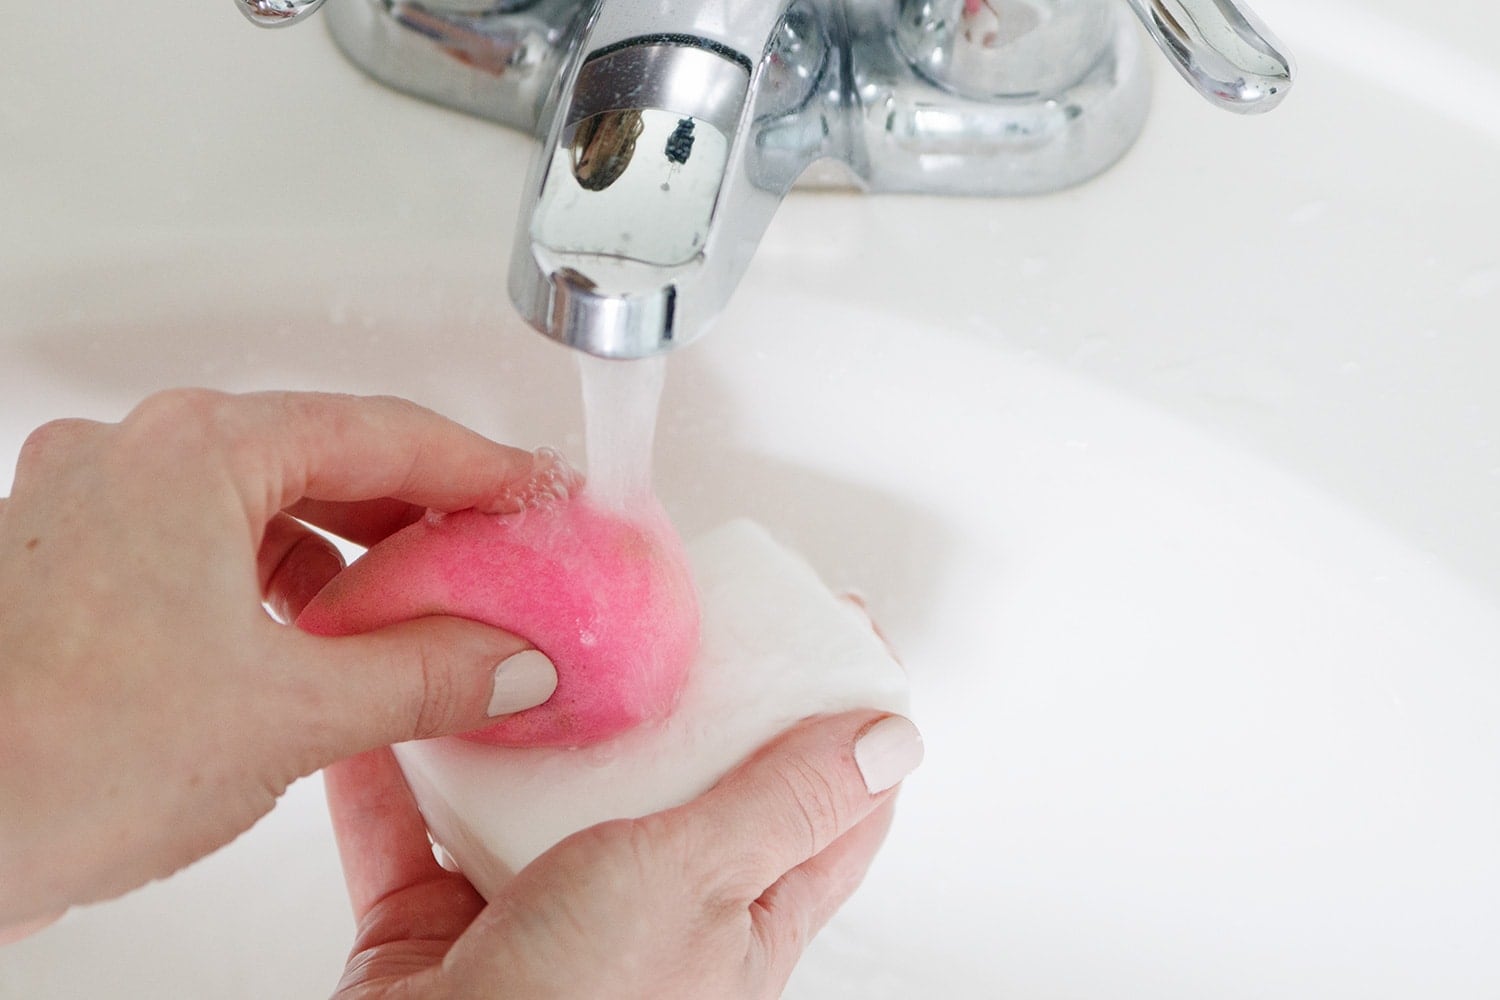 How To Clean a Makeup Sponge